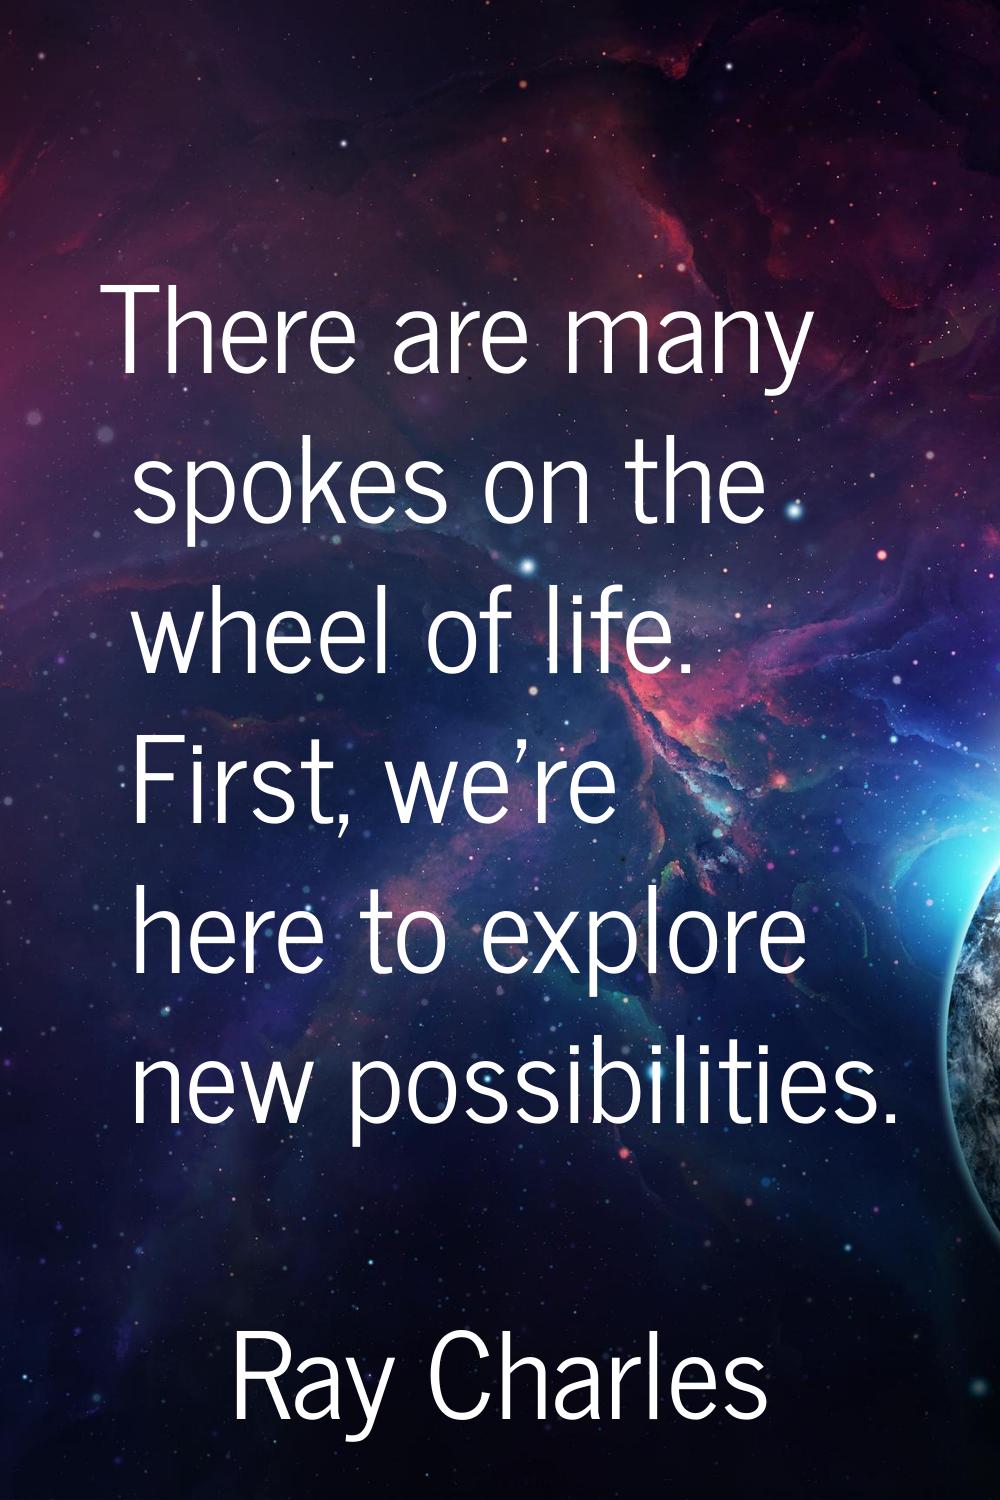 There are many spokes on the wheel of life. First, we're here to explore new possibilities.